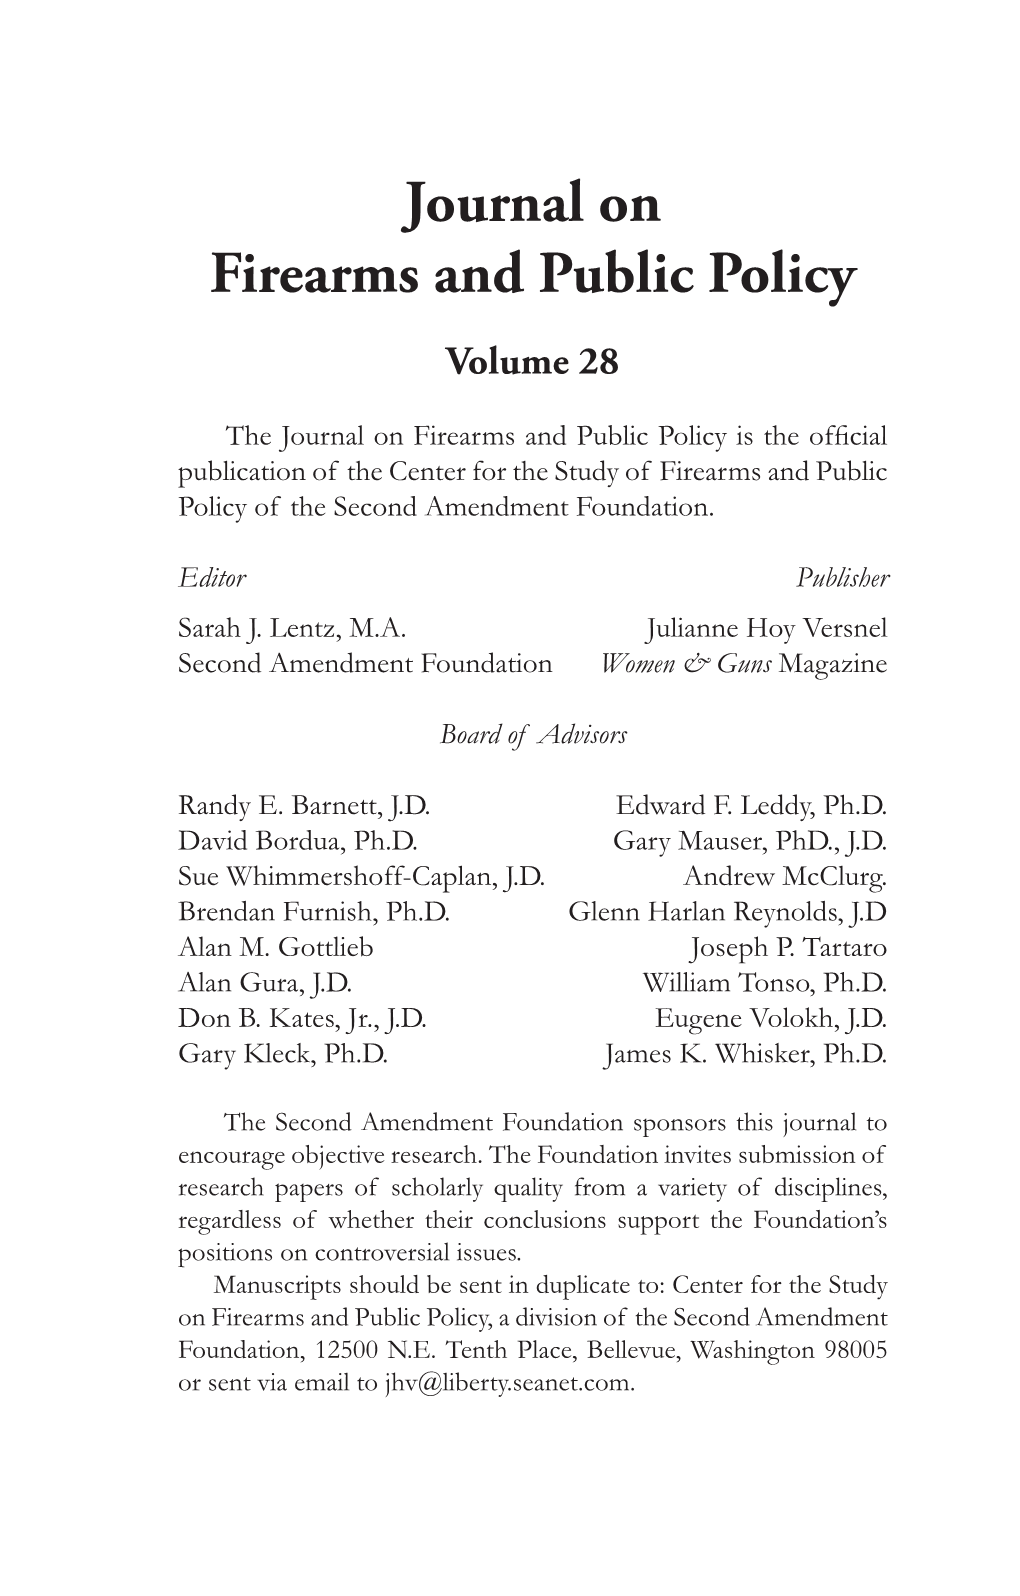 Journal on Firearms and Public Policy Volume 28